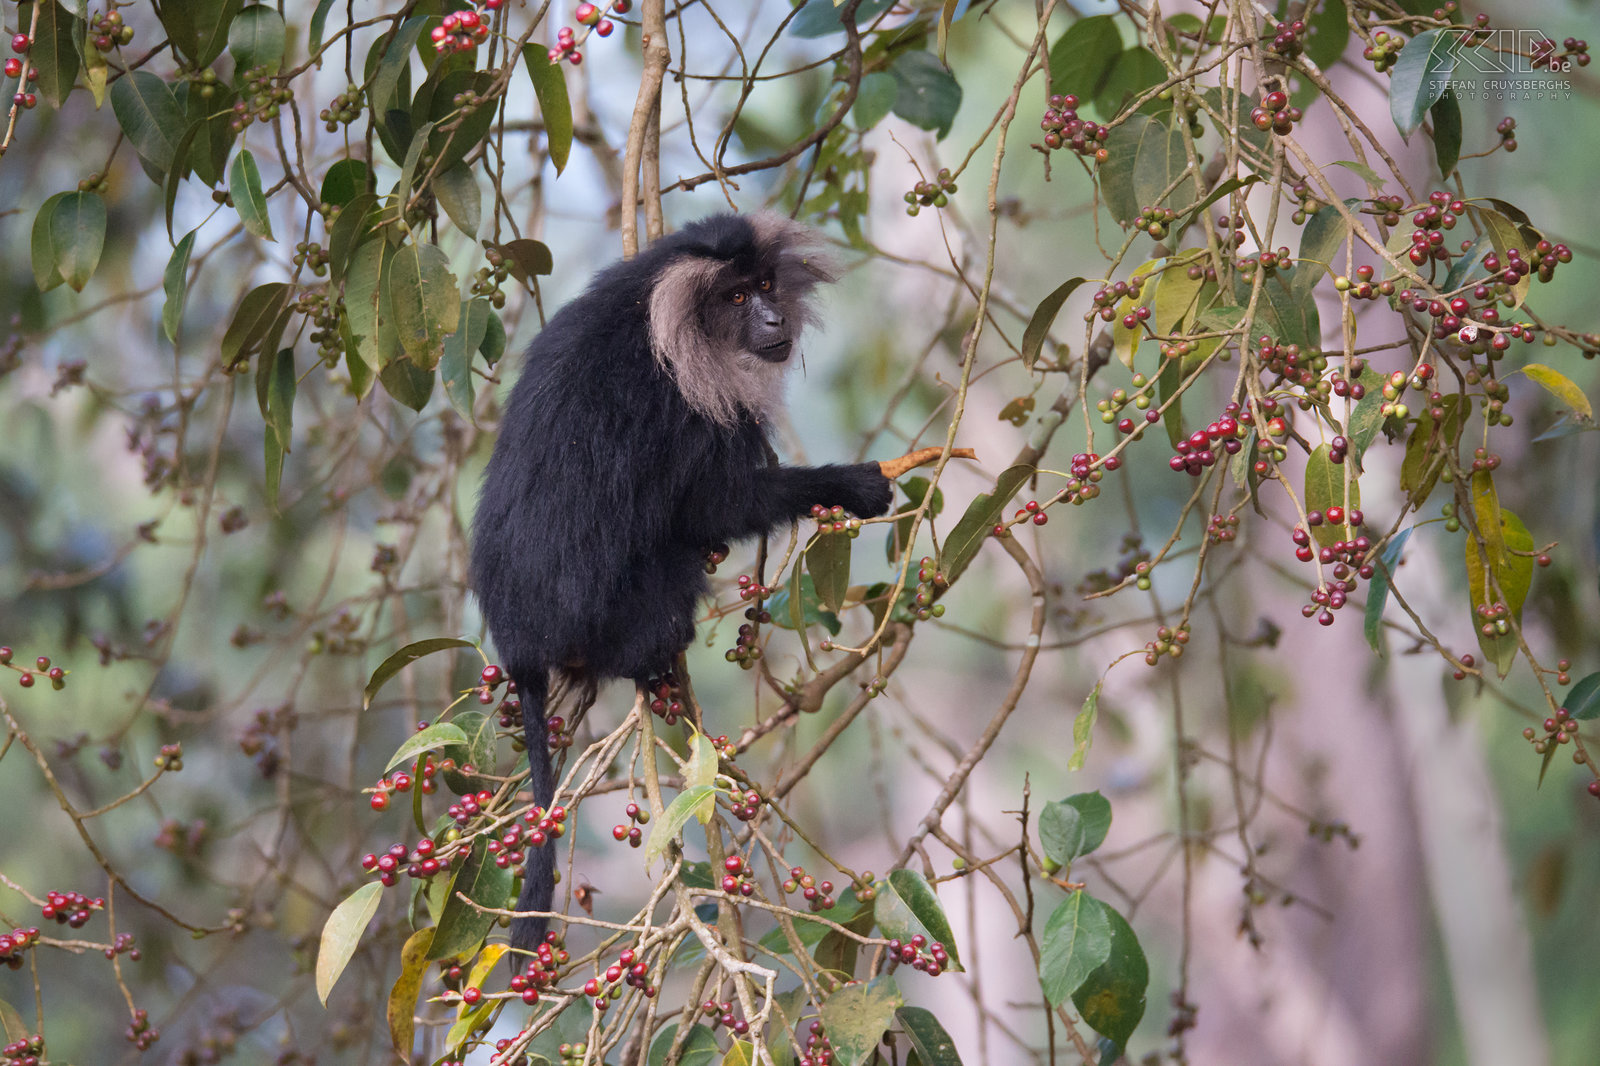 Valparai - Lion-tailed macaque The lion-tailed macaque or the wanderoo (Macaca silenus) is an endangered monkey and endemic to the Western Ghats mountains in south India. They are beautiful monkeys that can be found in the forests of the teaplantions of Valparai. Stefan Cruysberghs